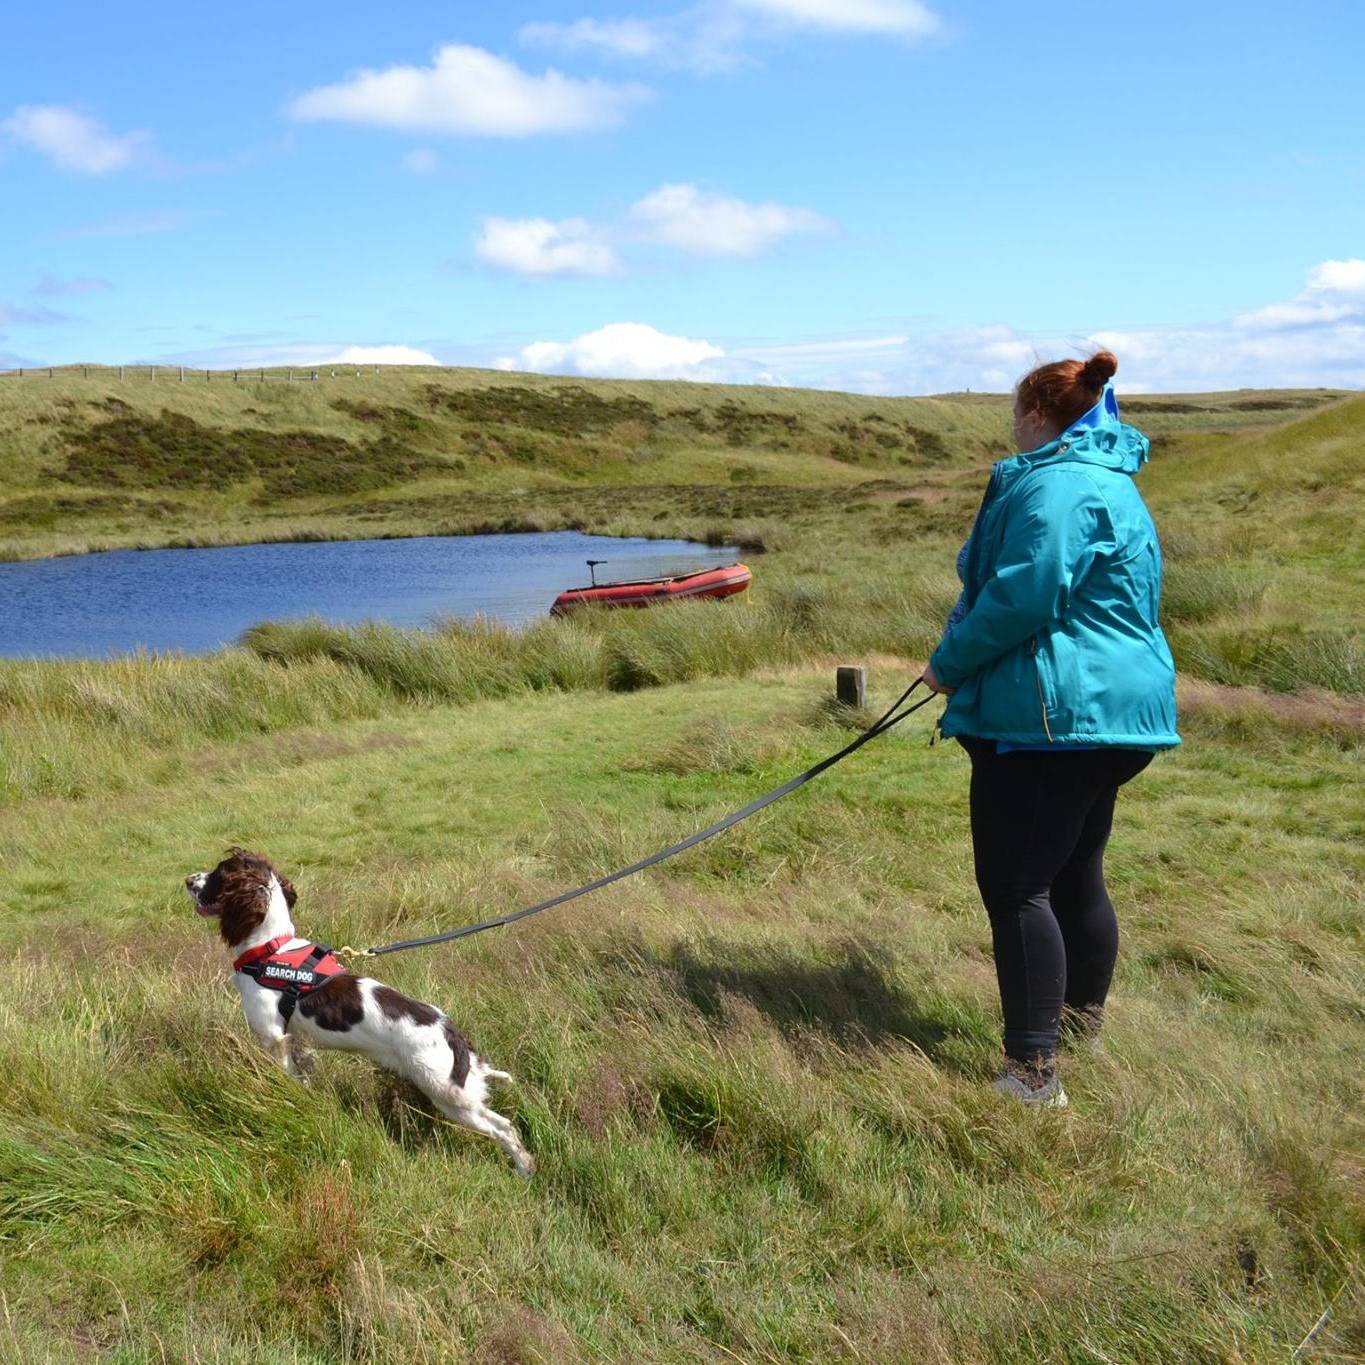 Person in a blue jacket with a dog on a lead with a harness